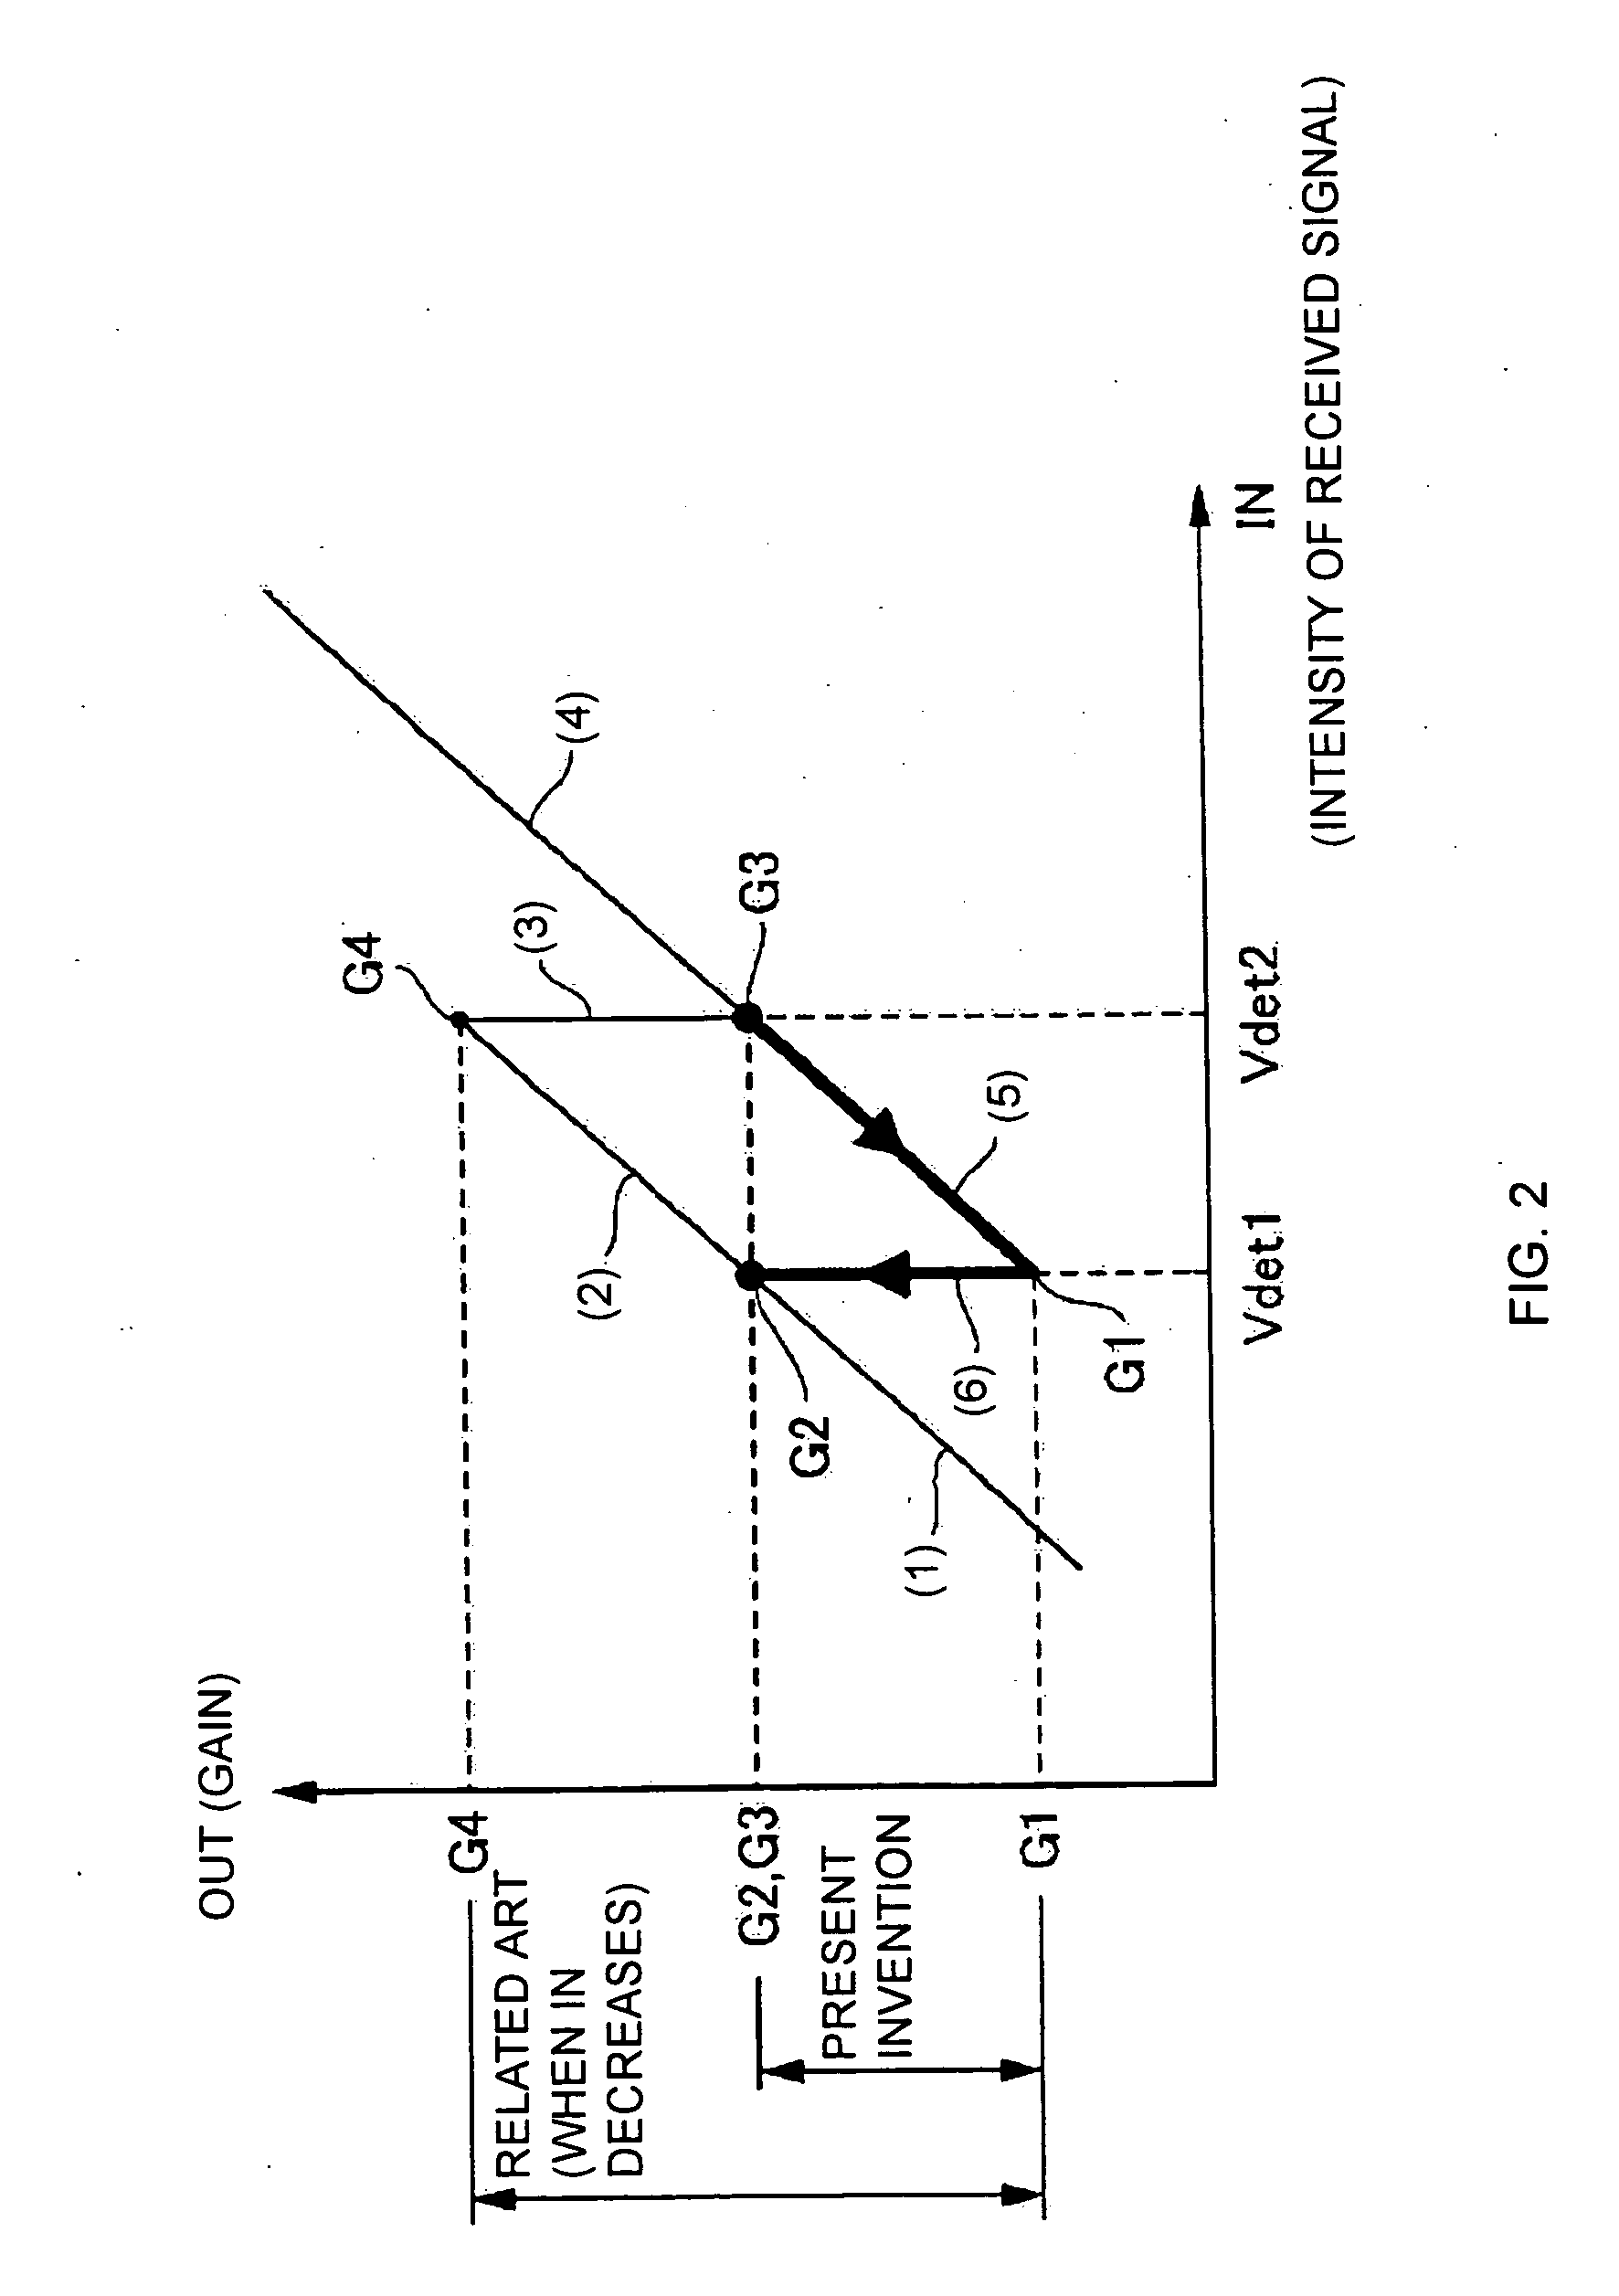 Automatic gain control circuit for receive apparatus for mobile object